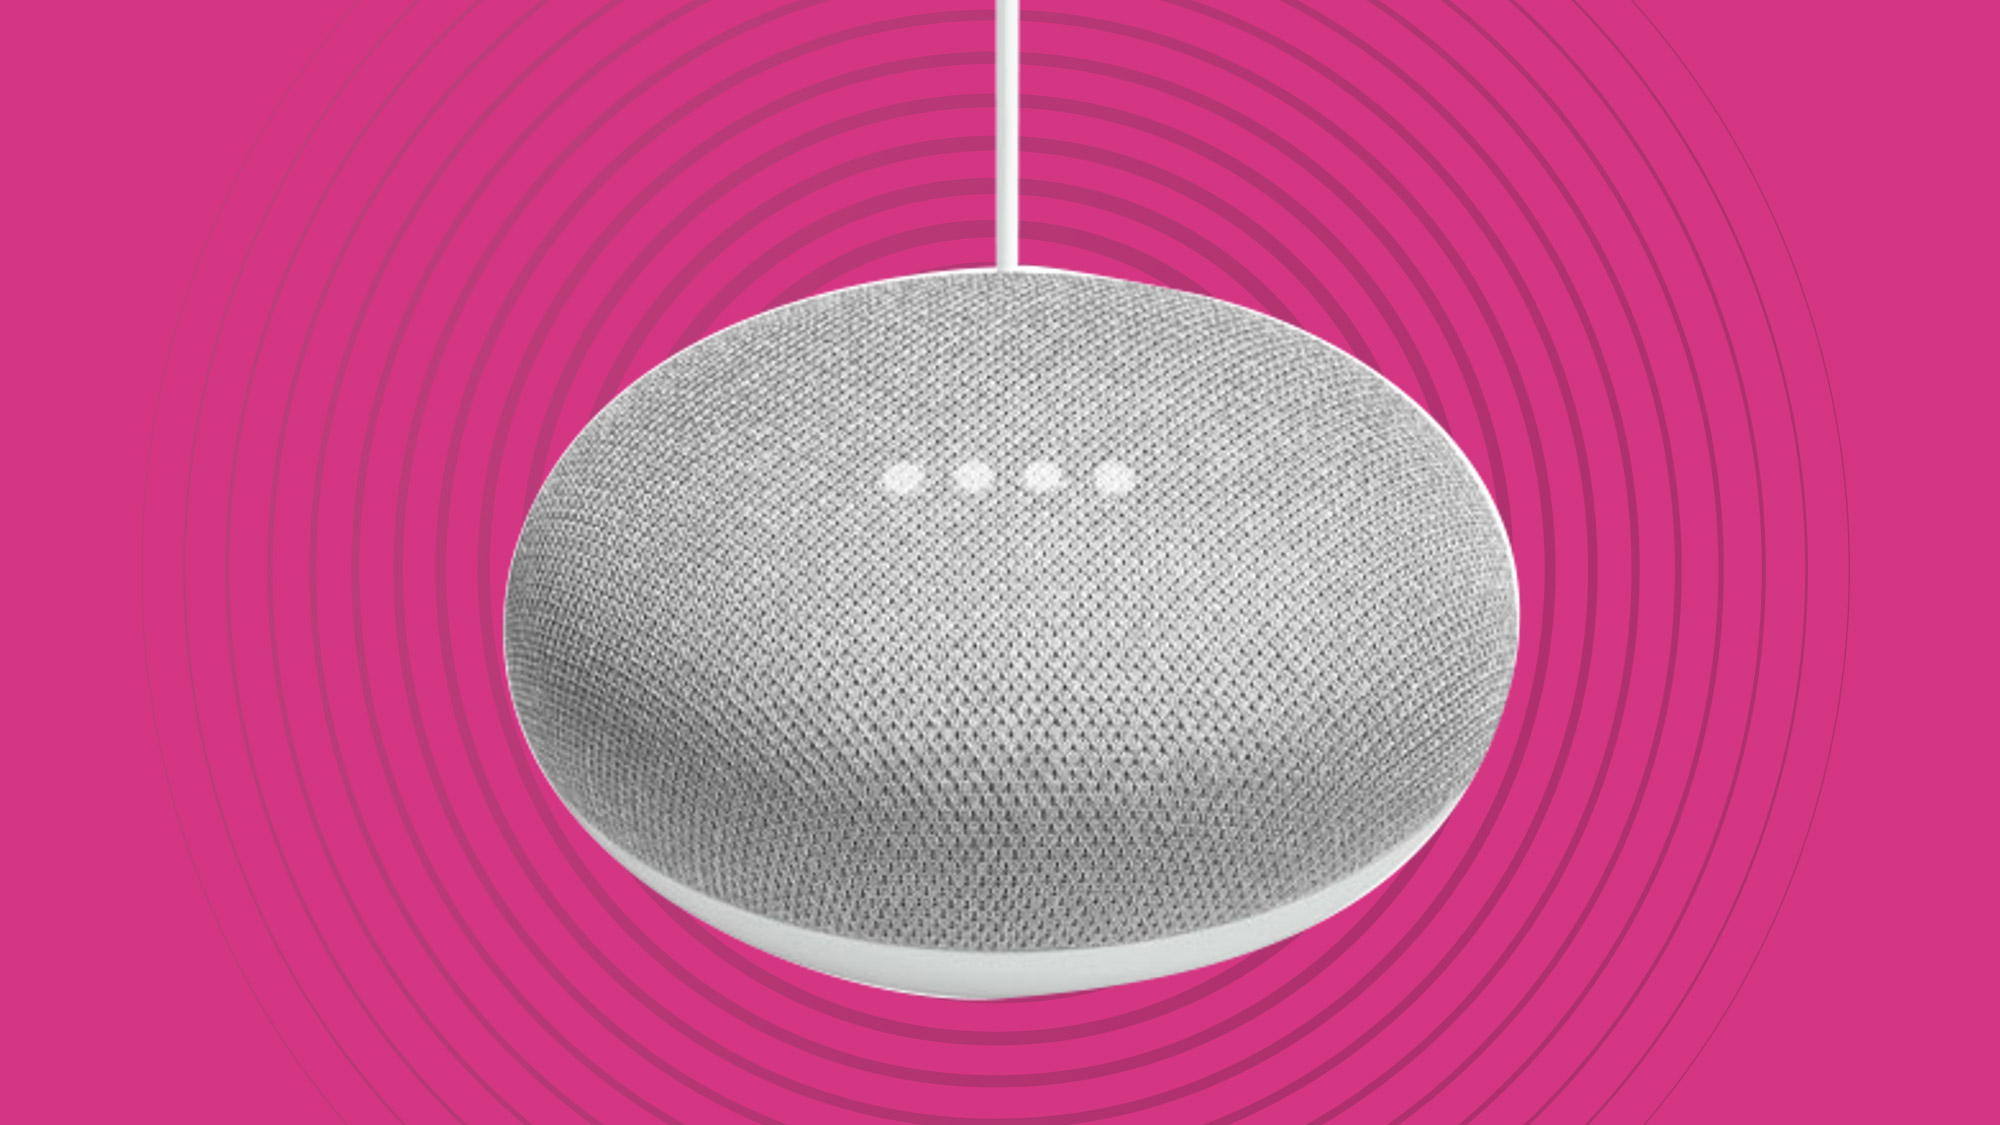 Google Home will go on sale today for $129, shipping November 4